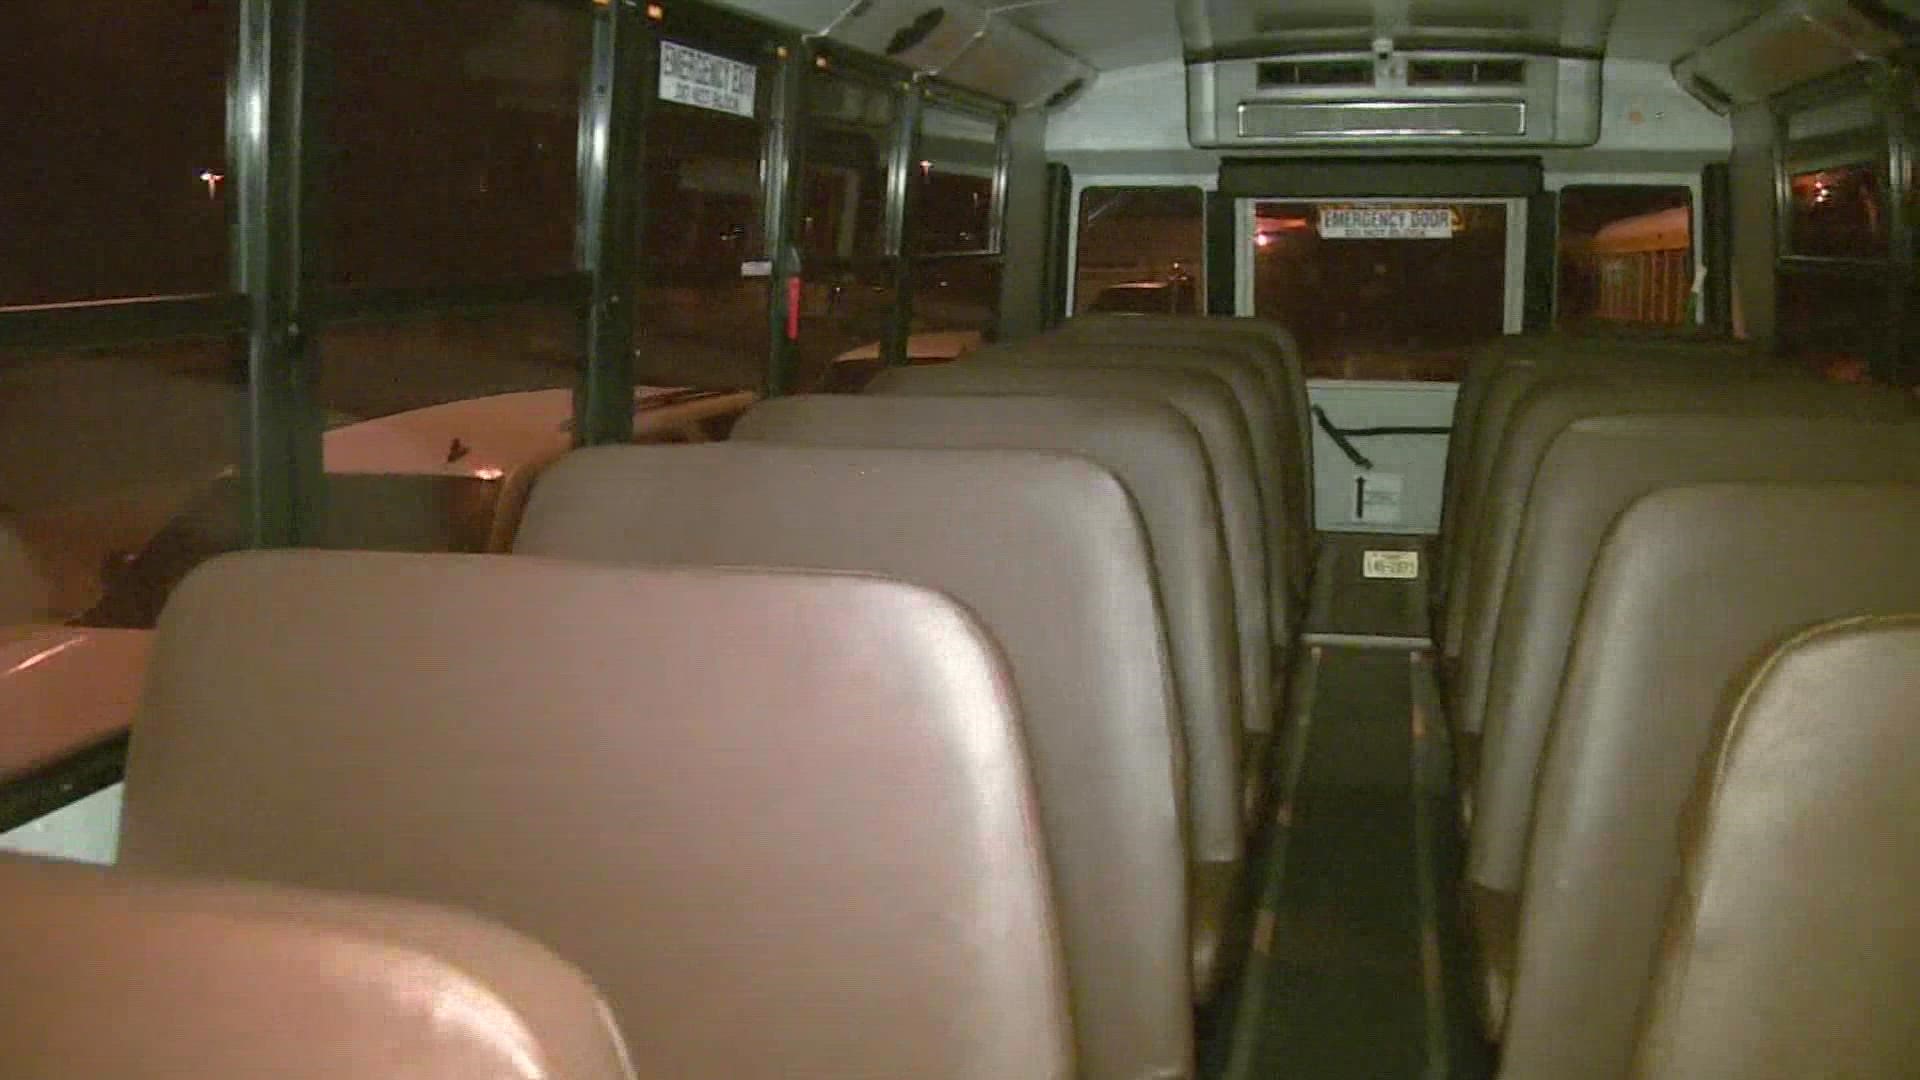 KHOU 11's Anayeli Ruiz reports on the extra steps the Fort Bend Independent School District is taking when it comes to cleaning their buses